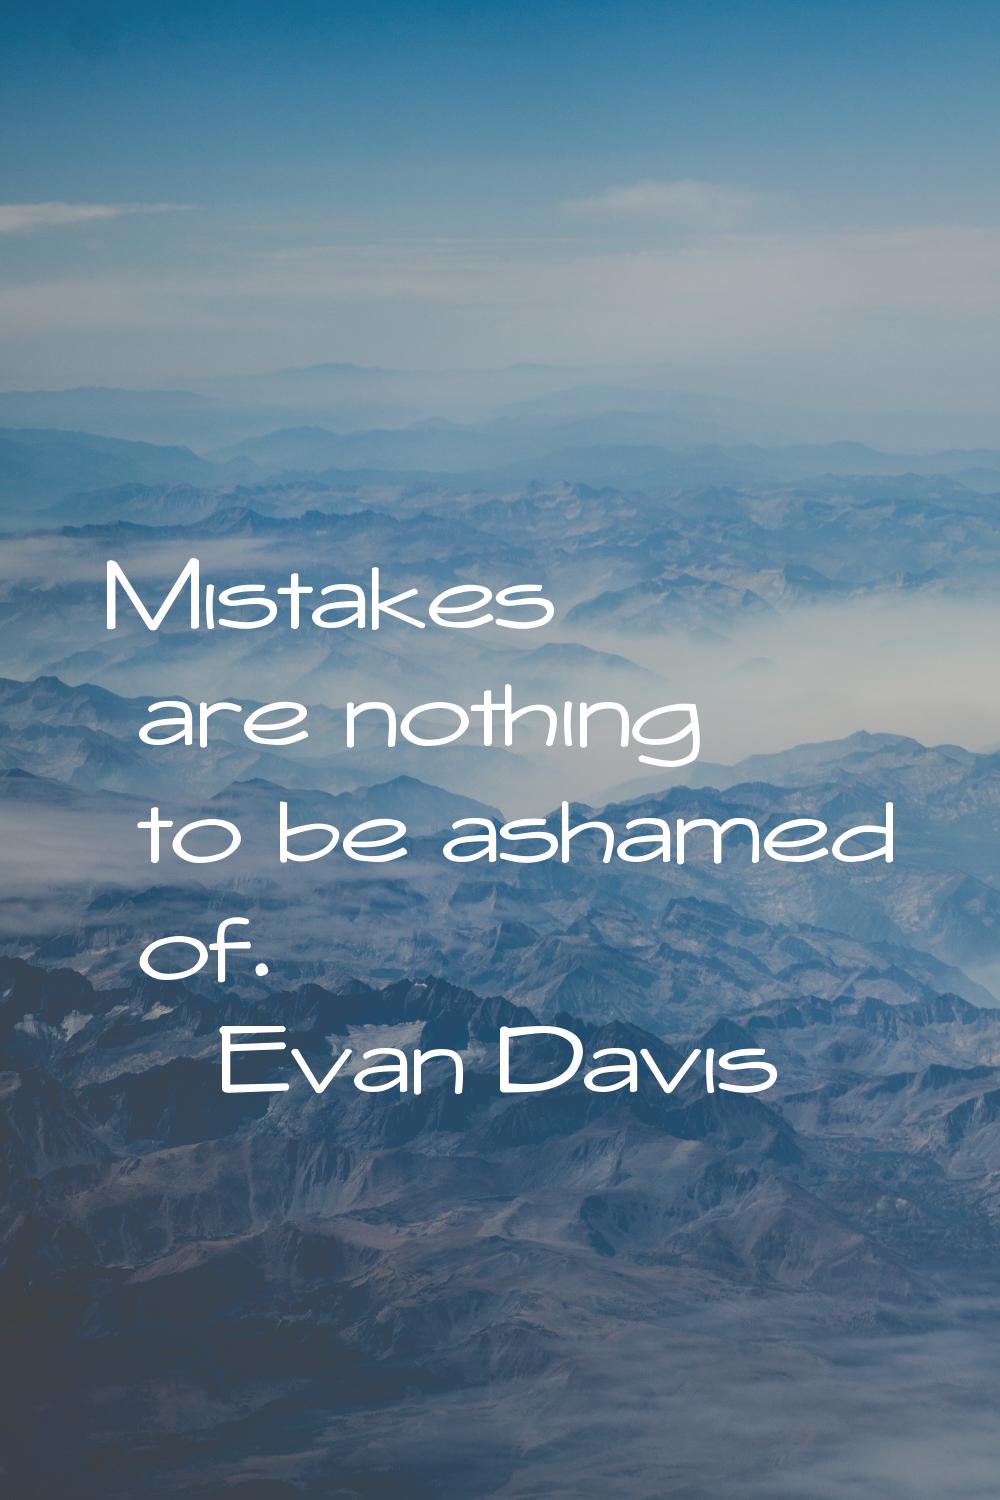 Mistakes are nothing to be ashamed of.